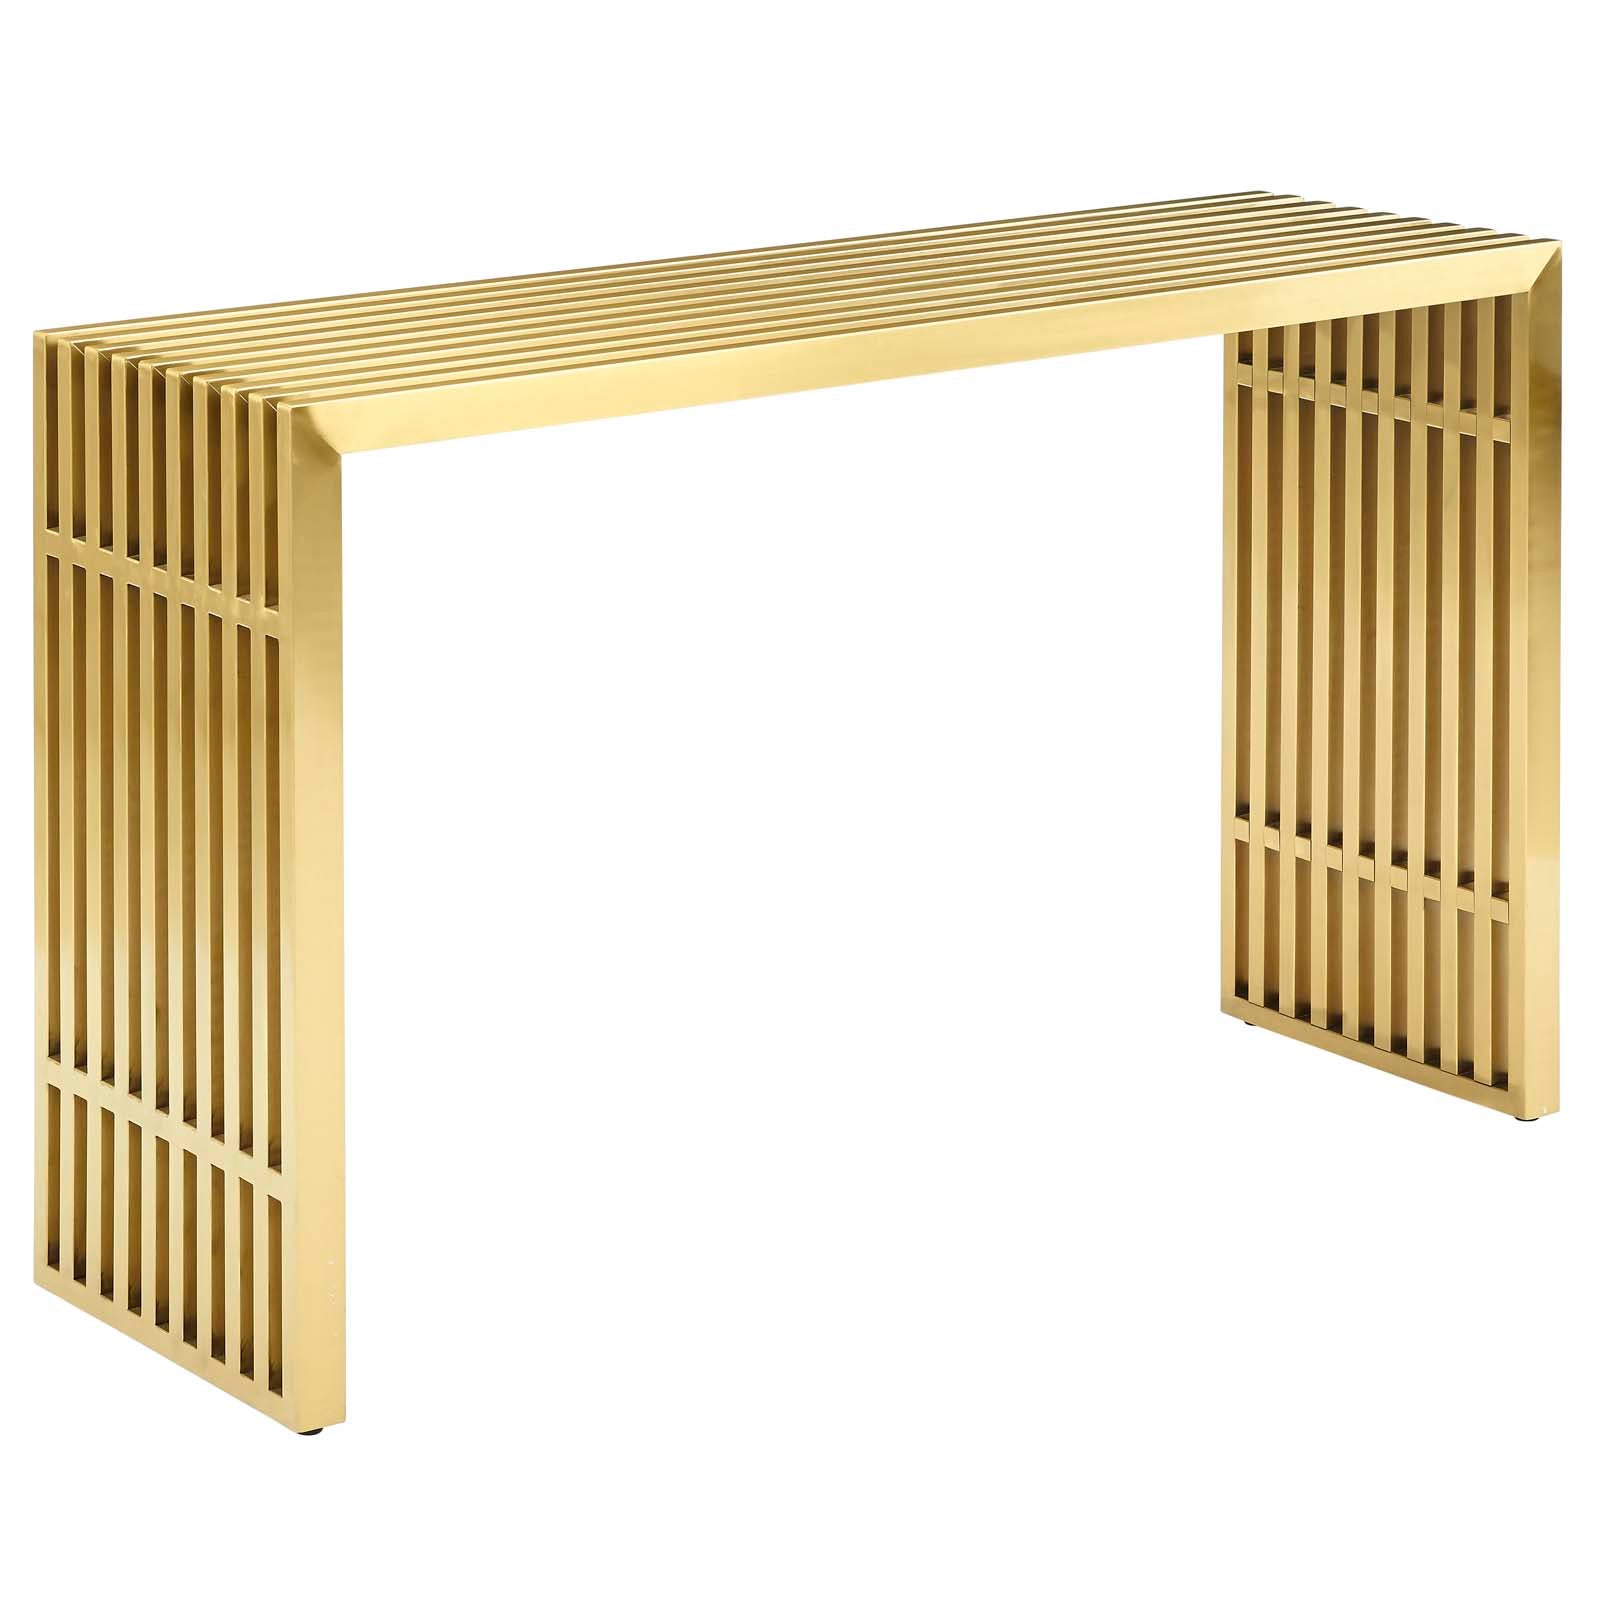 Gridiron Stainless Steel Console Table - East Shore Modern Home Furnishings